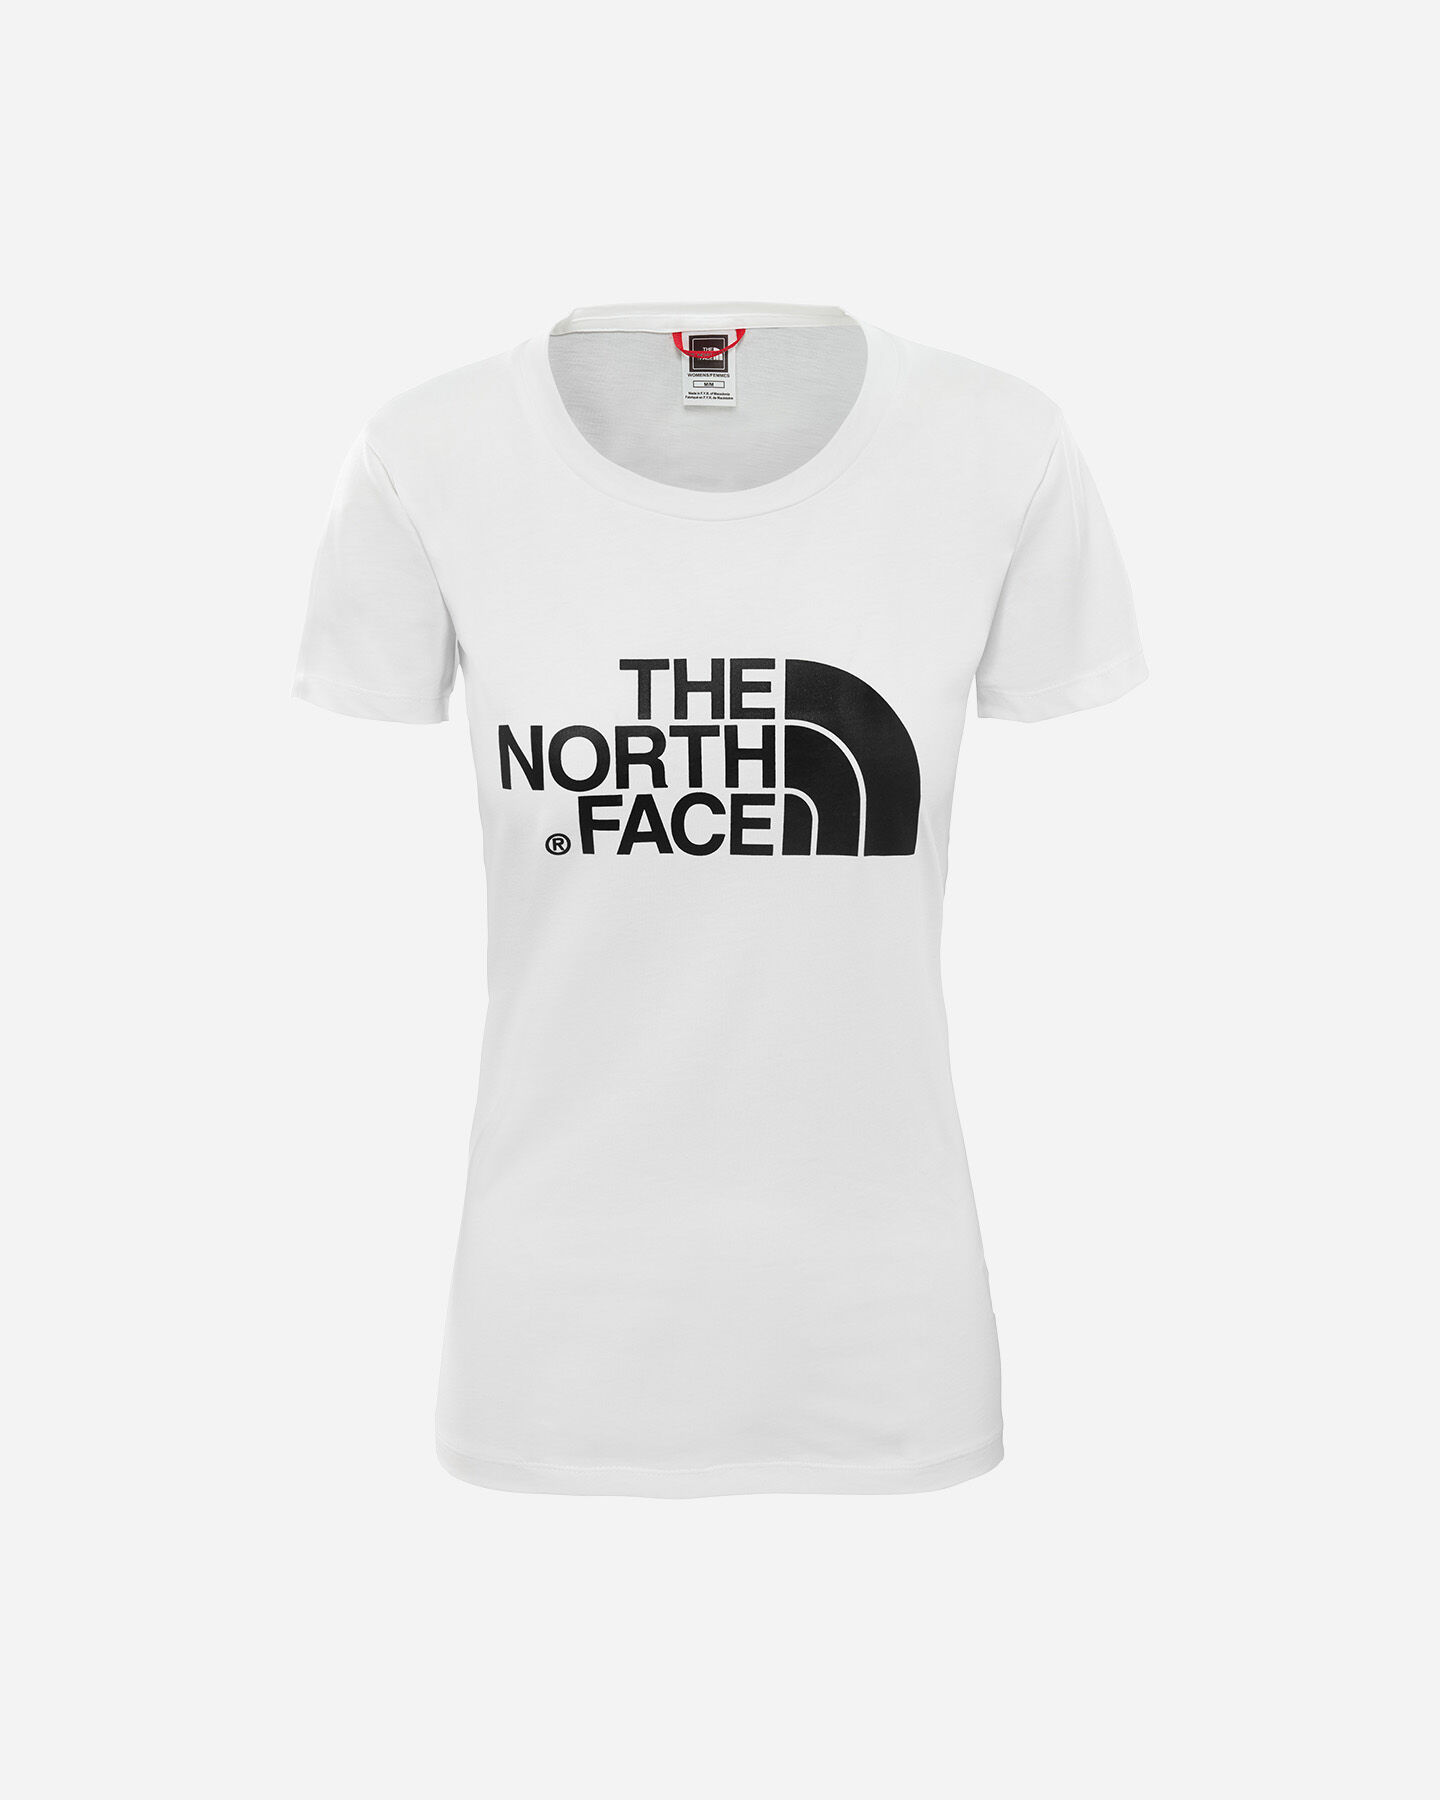  T-Shirt THE NORTH FACE EASY W S5015032|LG5|XS scatto 0